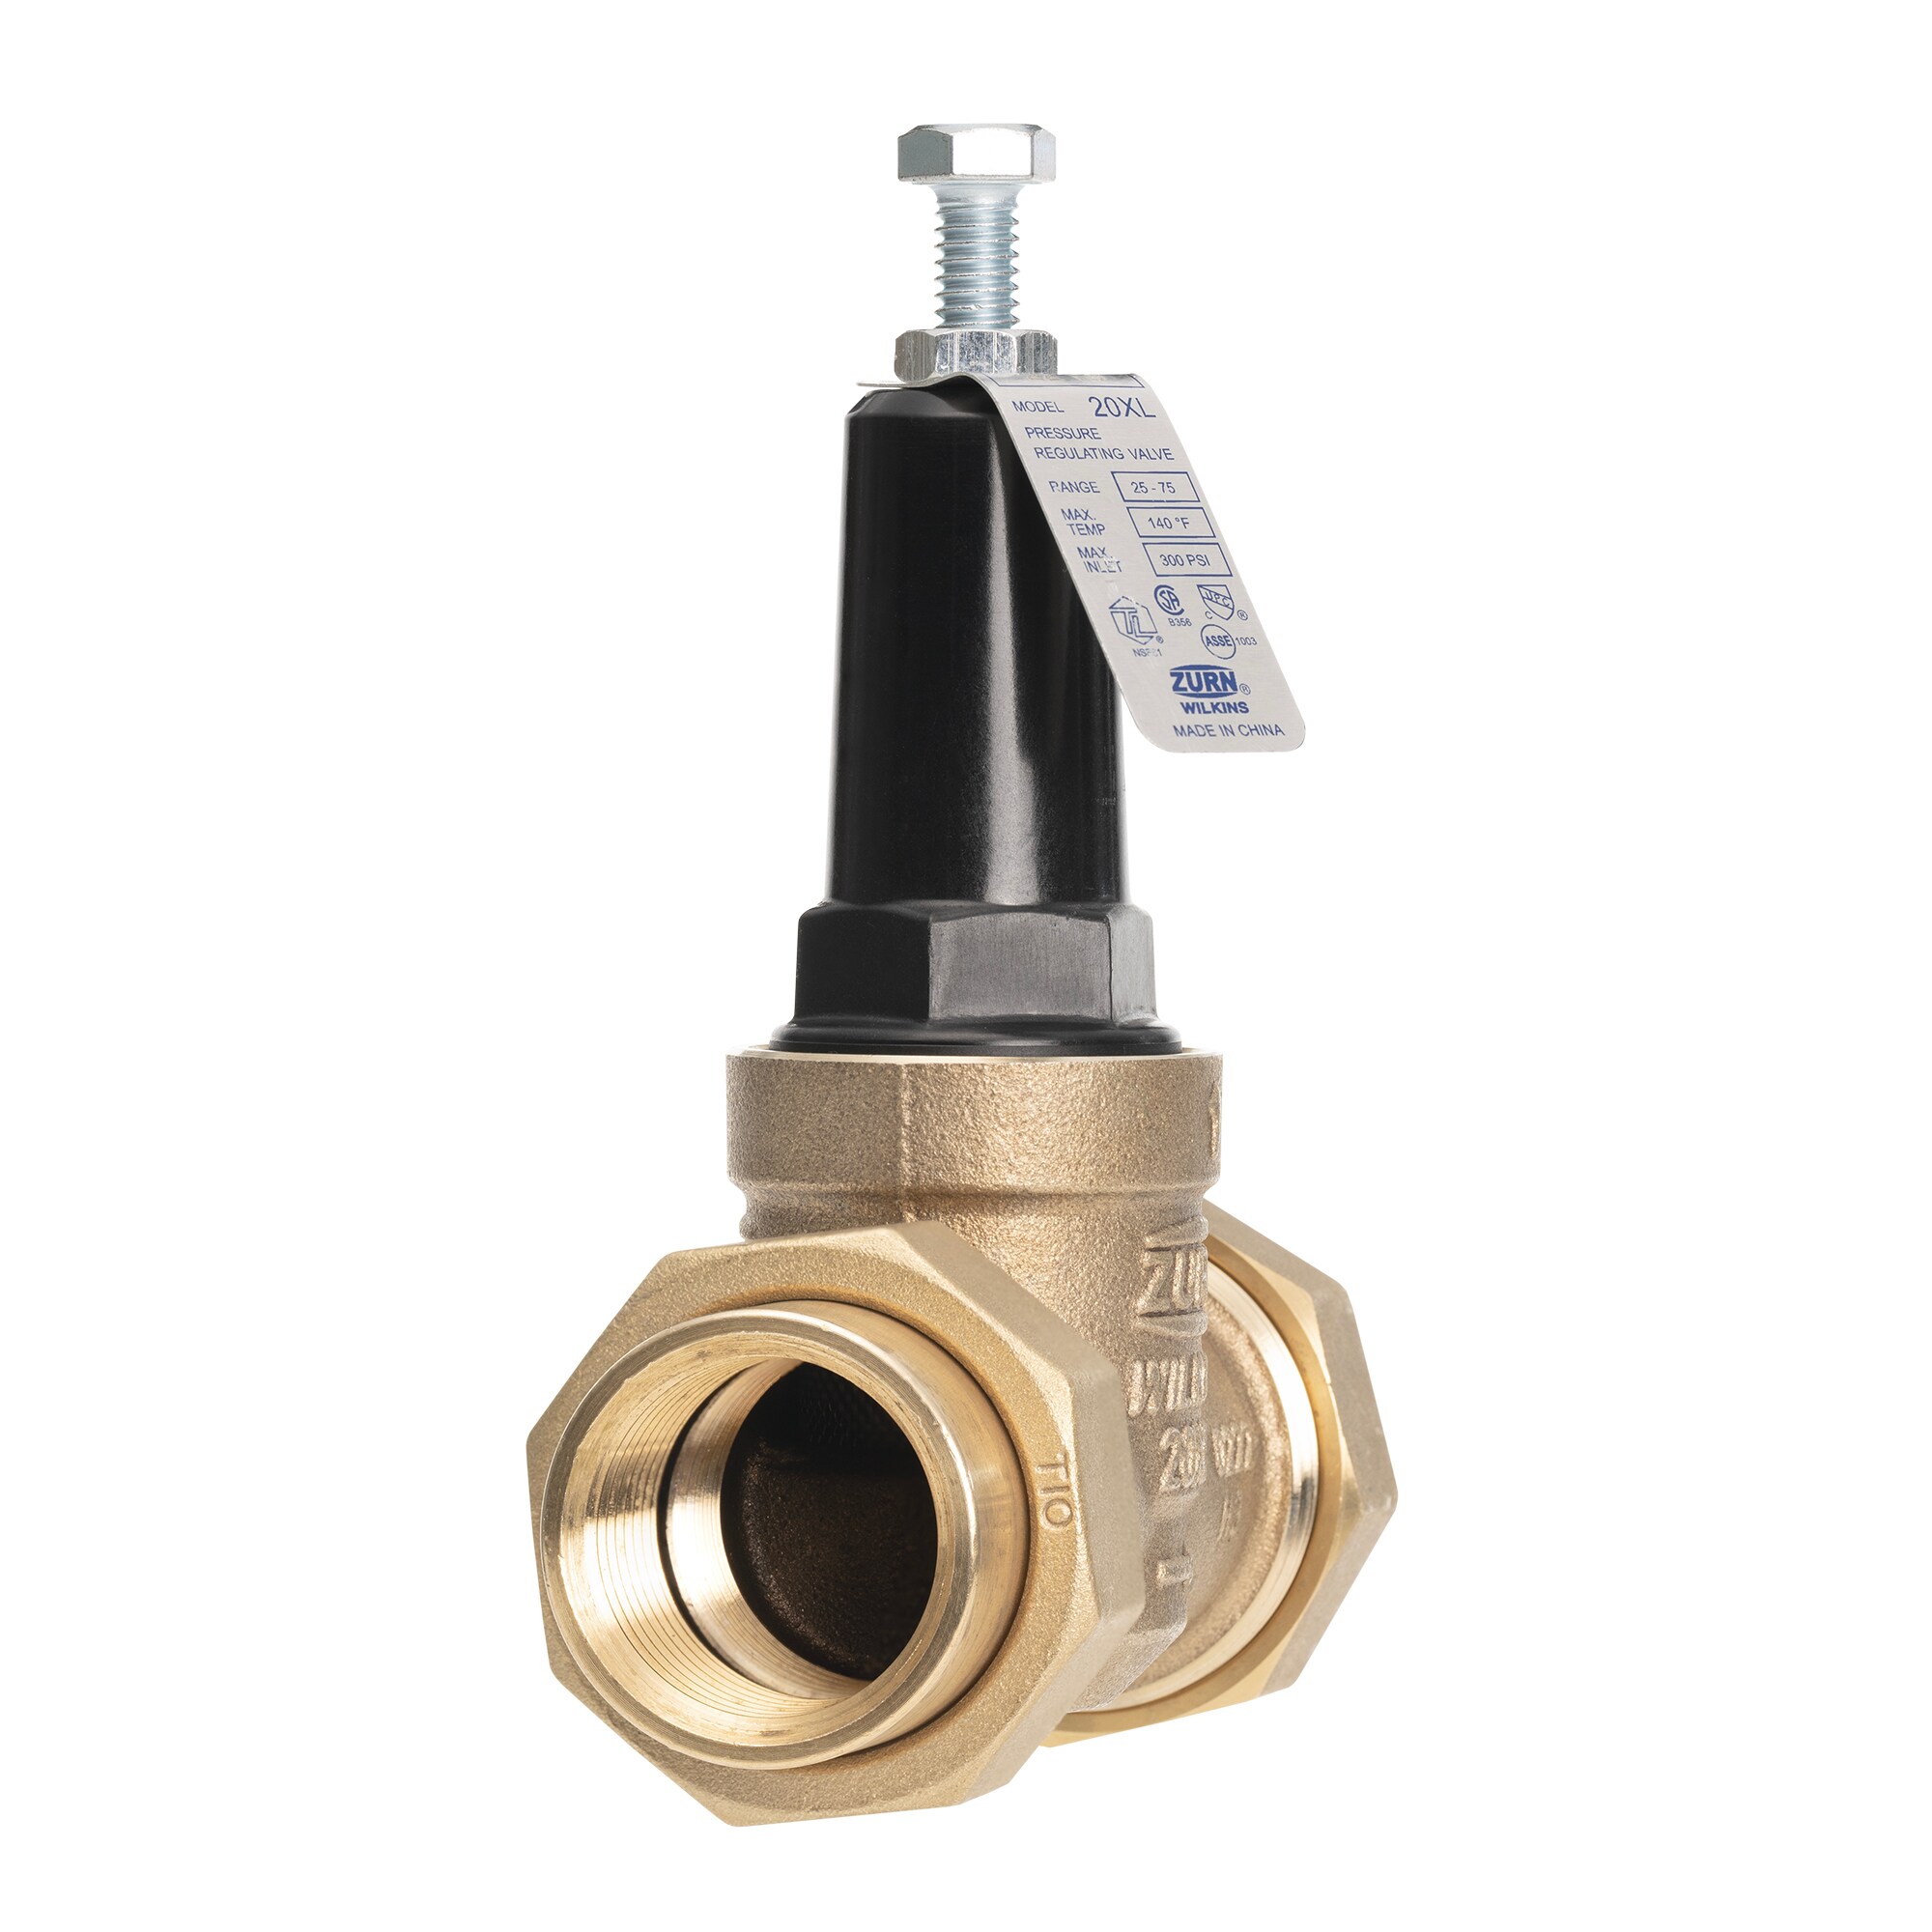 Brass Compression Union-Reducing Union China Factory-Topa